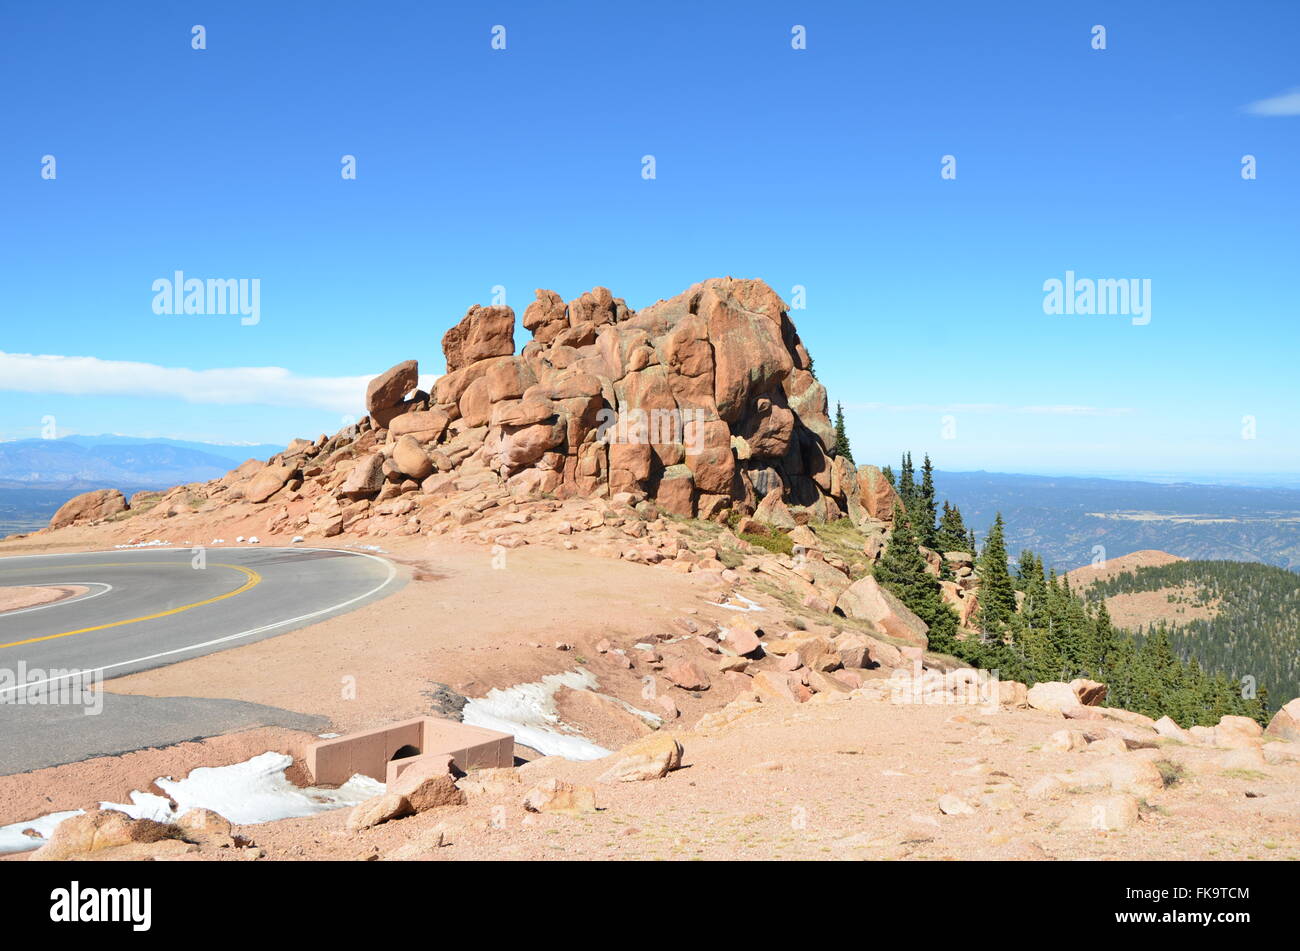 Rock outcropping on Pike's Peak Road, Pike's Peak Colorado Stock Photo